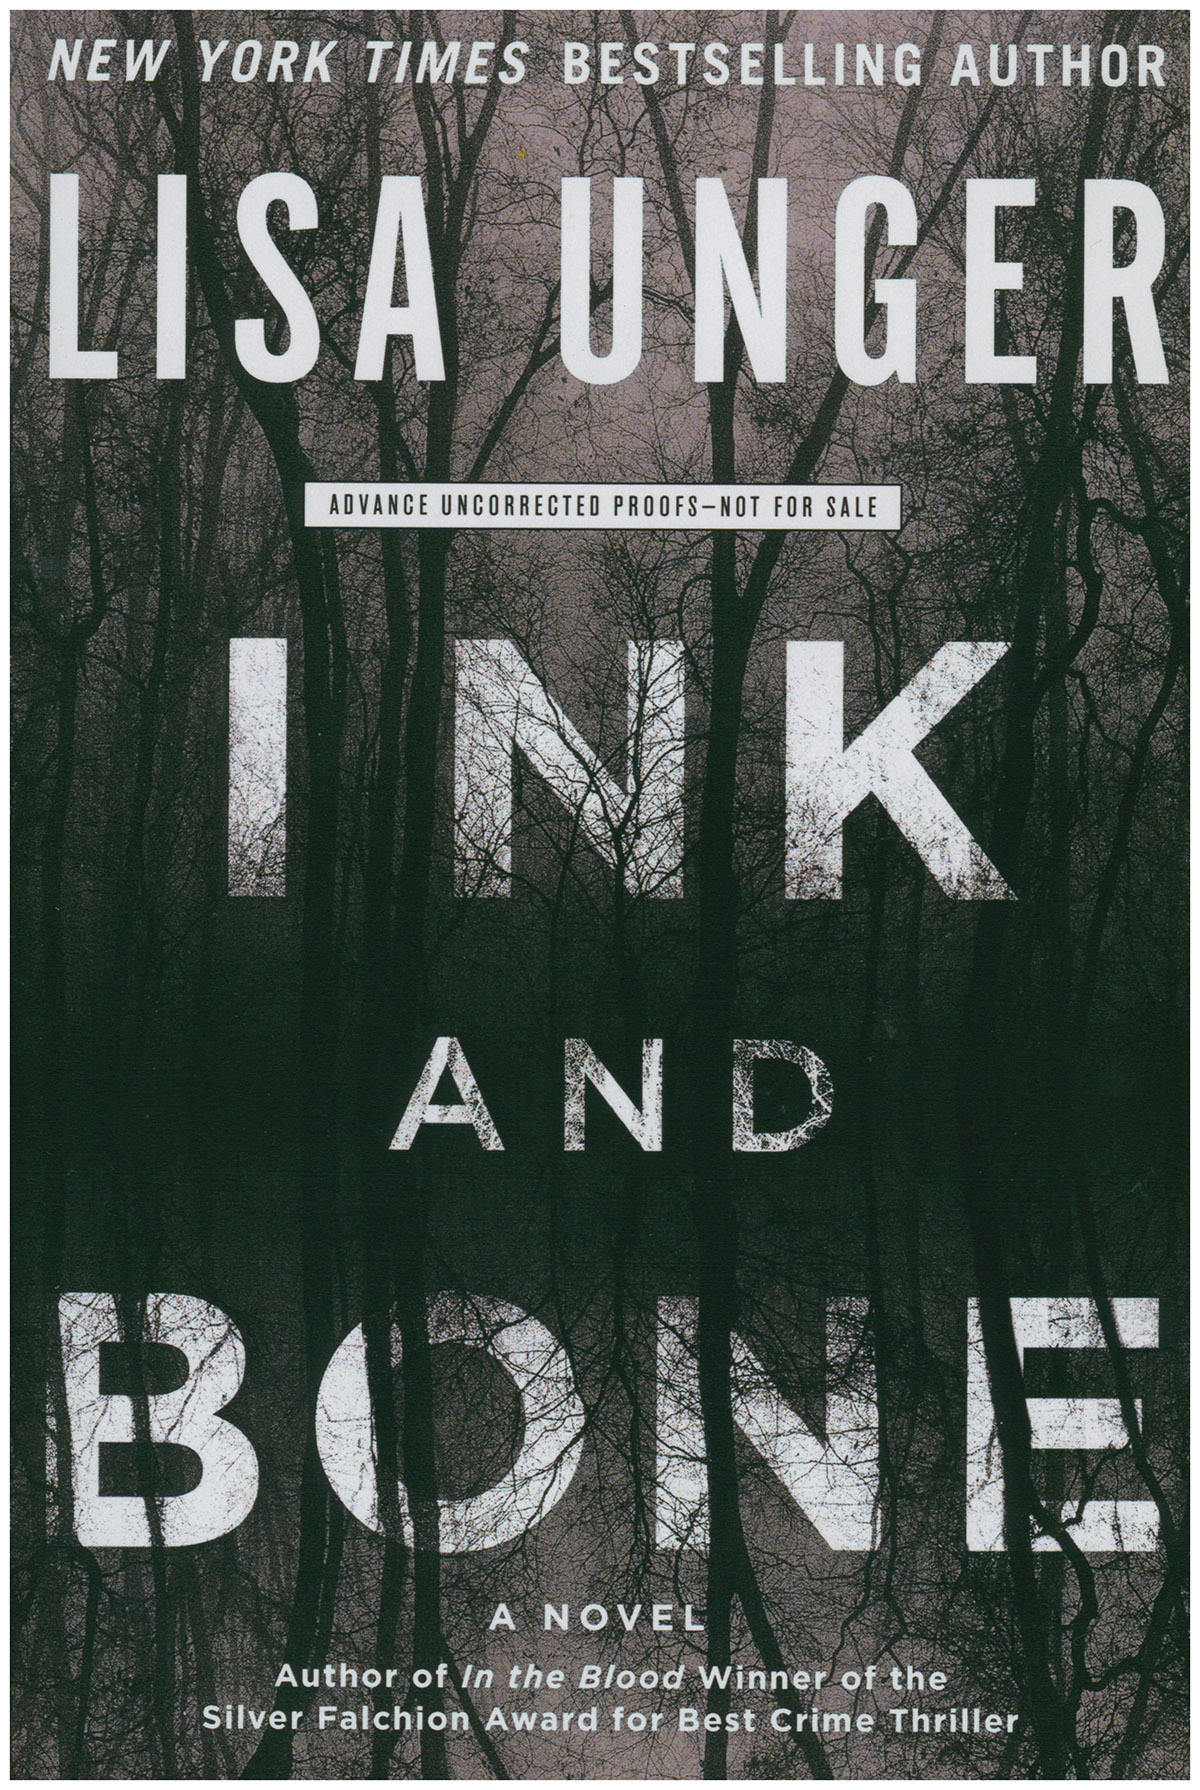 Unger, Lisa - Ink and Bone: A Novel (Advance Uncorrected Proofs)